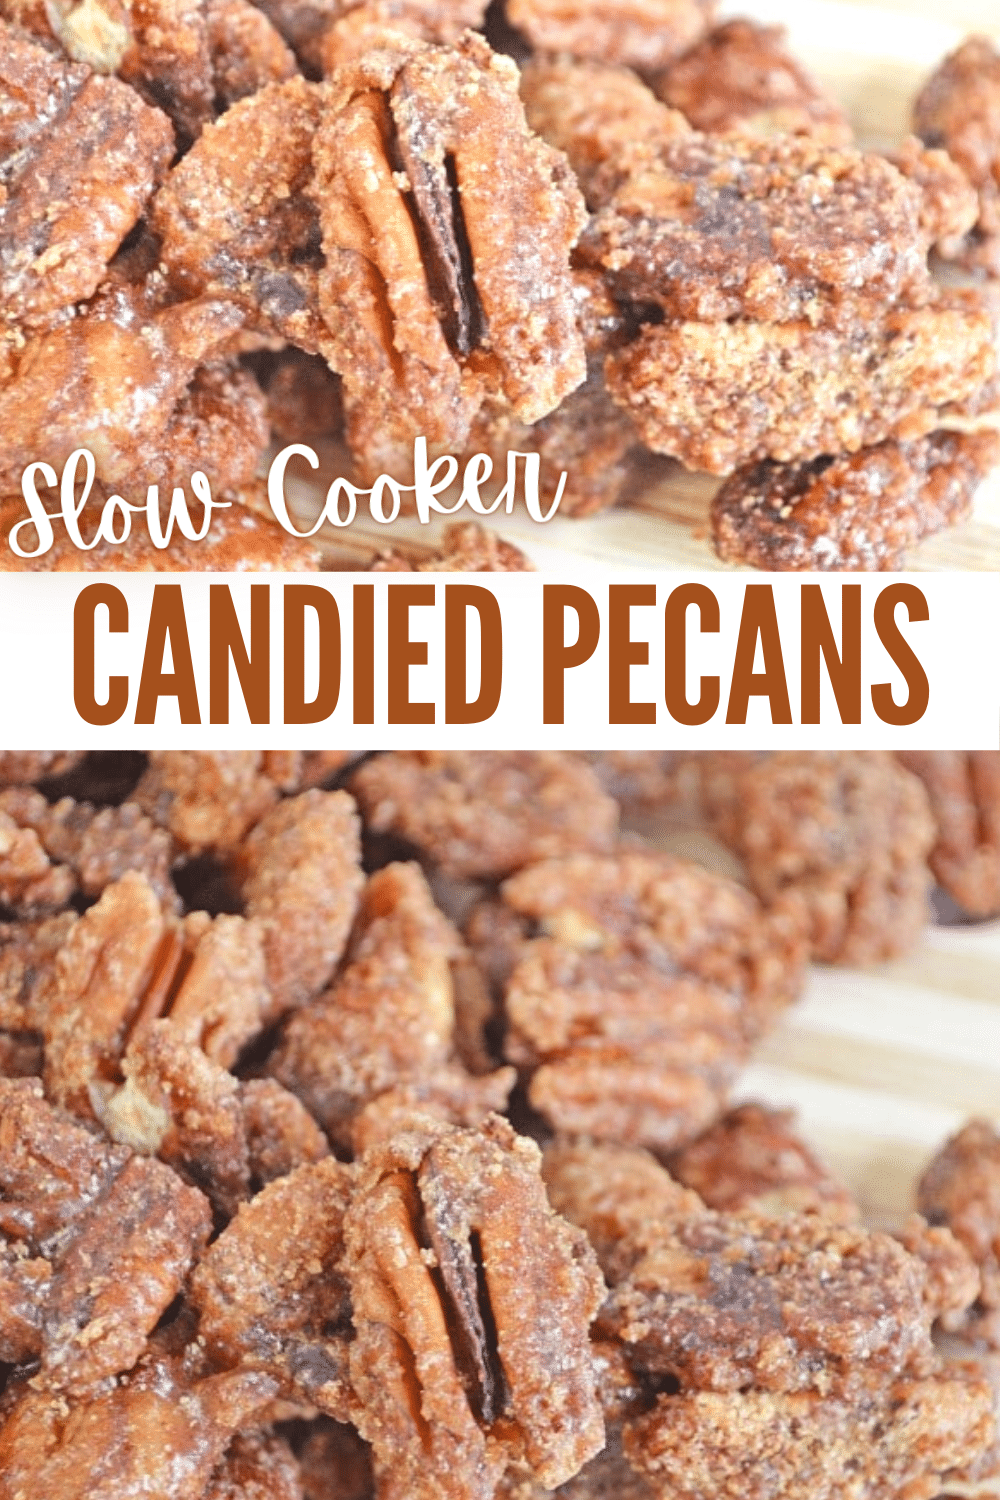 These Slow Cooker Candied Pecans are yummy all on their own, but also make salads so much better. Make them for yourself or to give as gifts. Super easy. So delicious! #candiedpecans #sweettreats #DIYgiftidea via @wondermomwannab